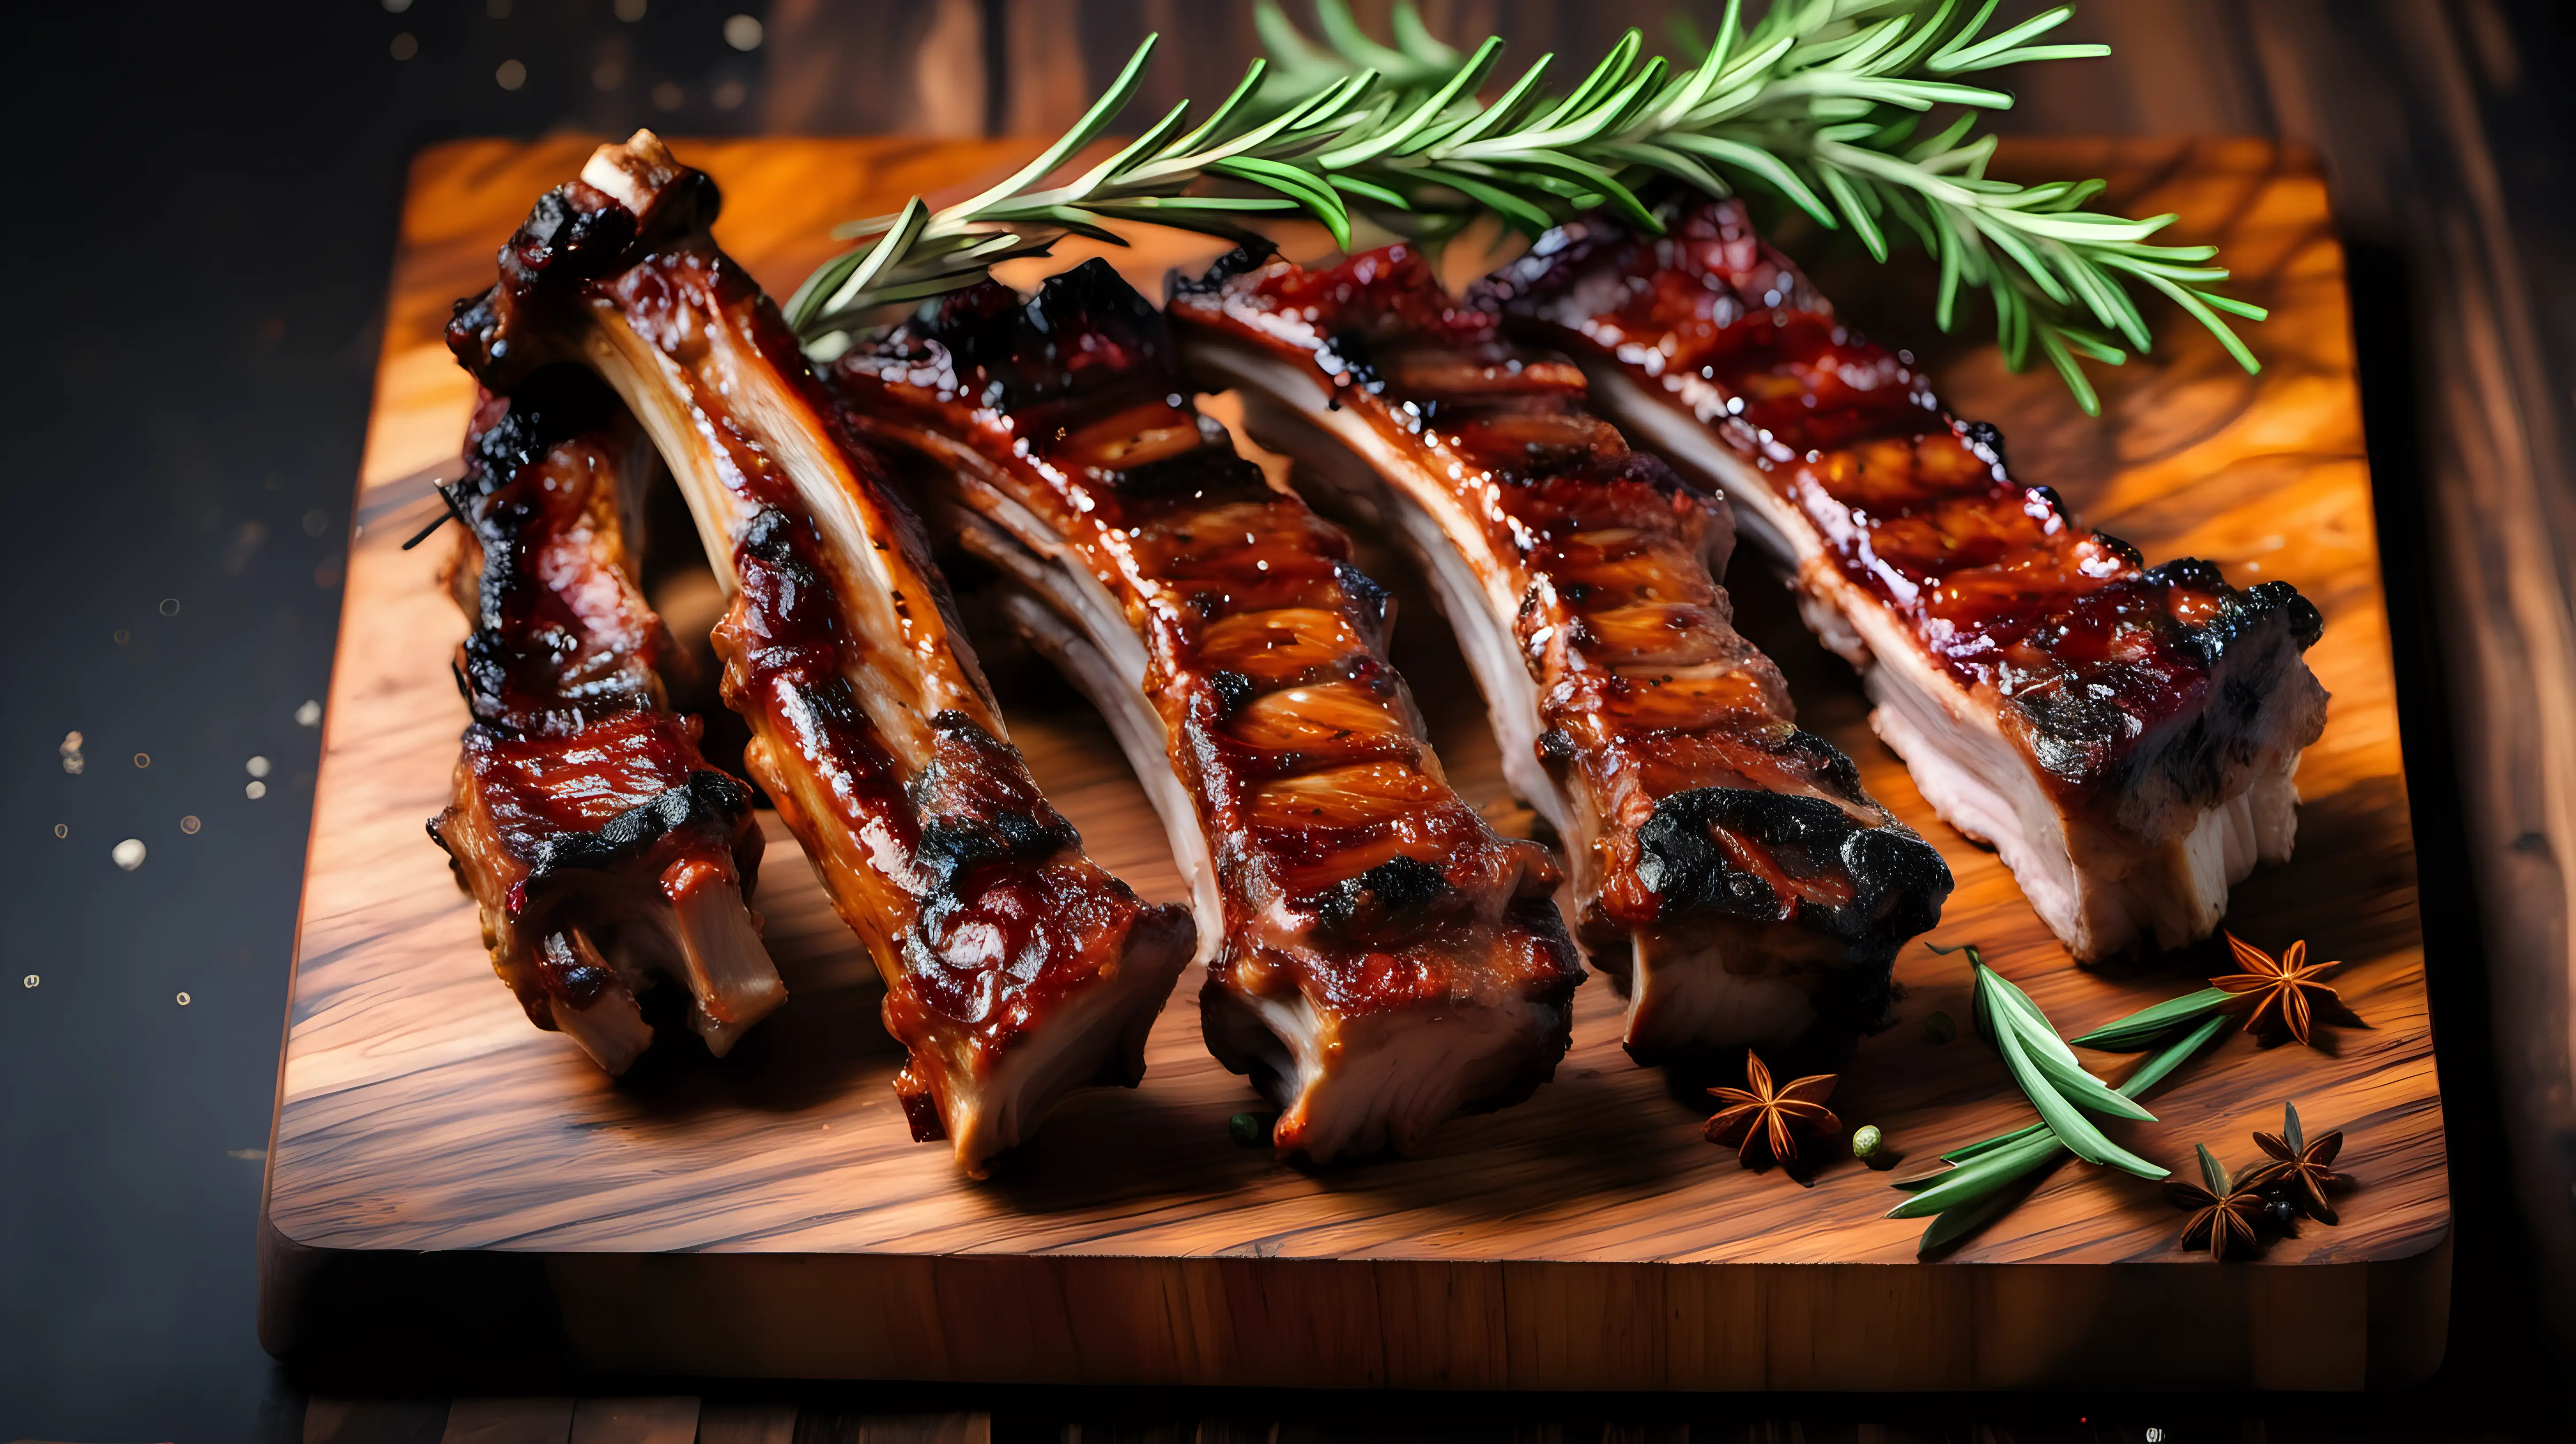 Savory Grilled Pork Ribs with Aromatic Rosemary and Spices